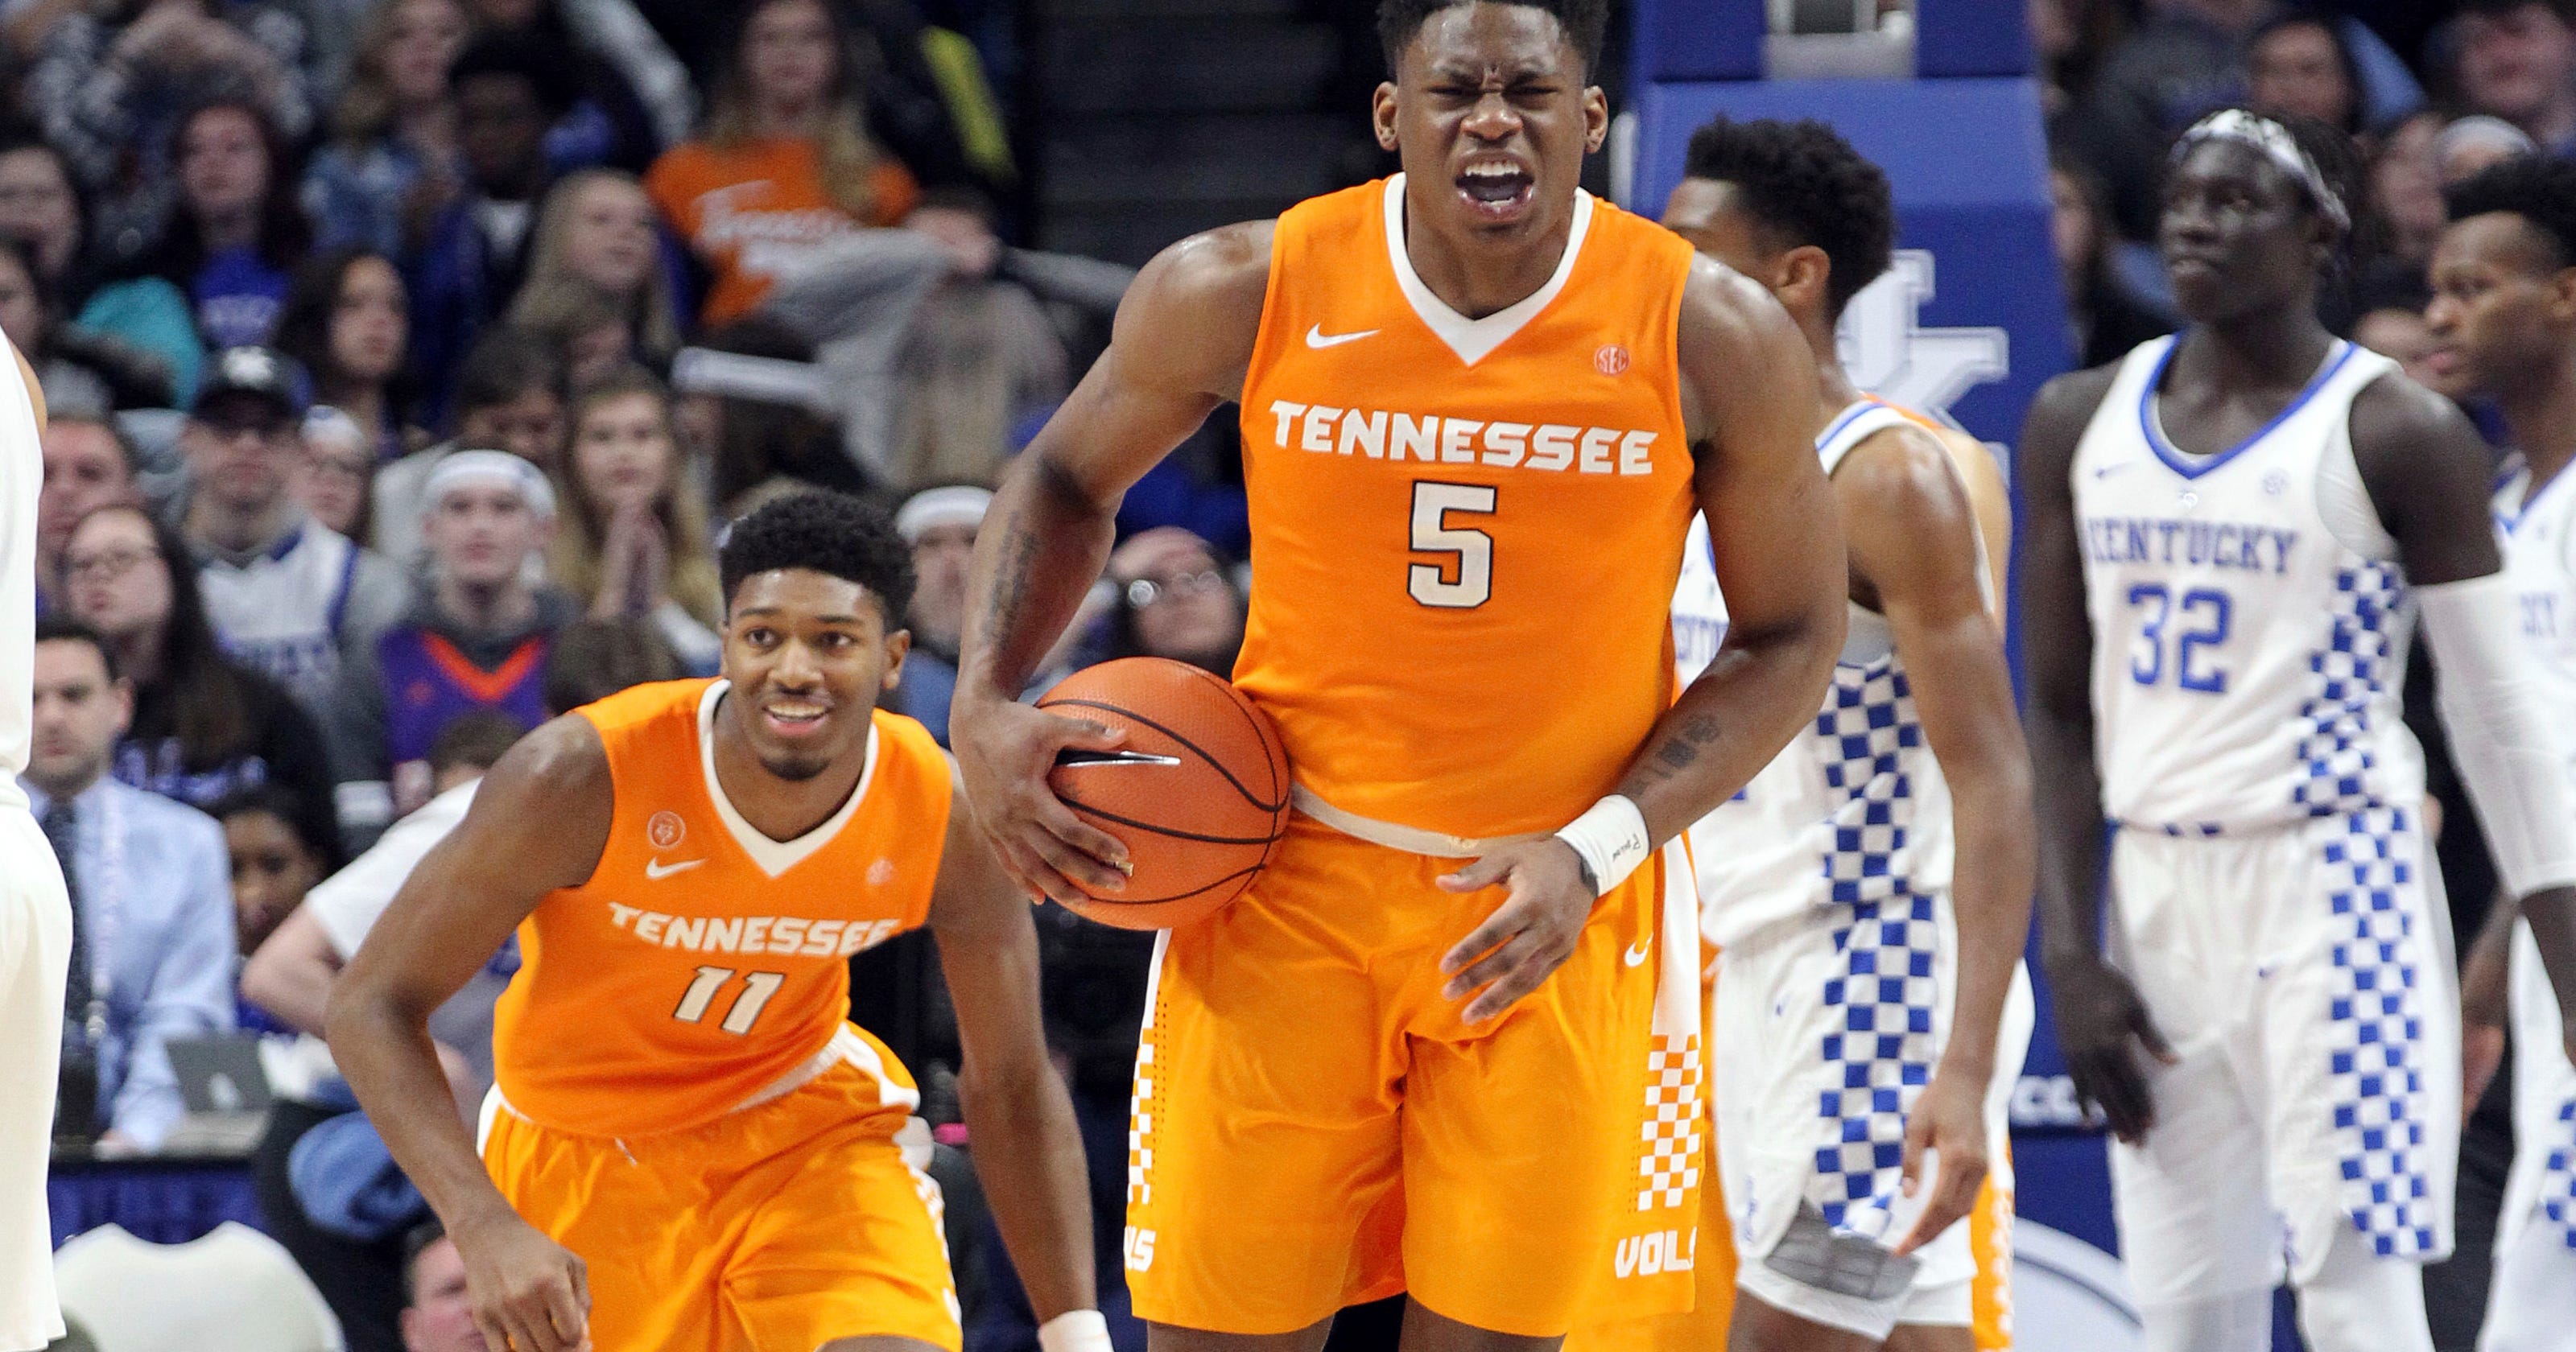 UT Vols basketball vs. Kentucky 'not just another one' for Tennessee